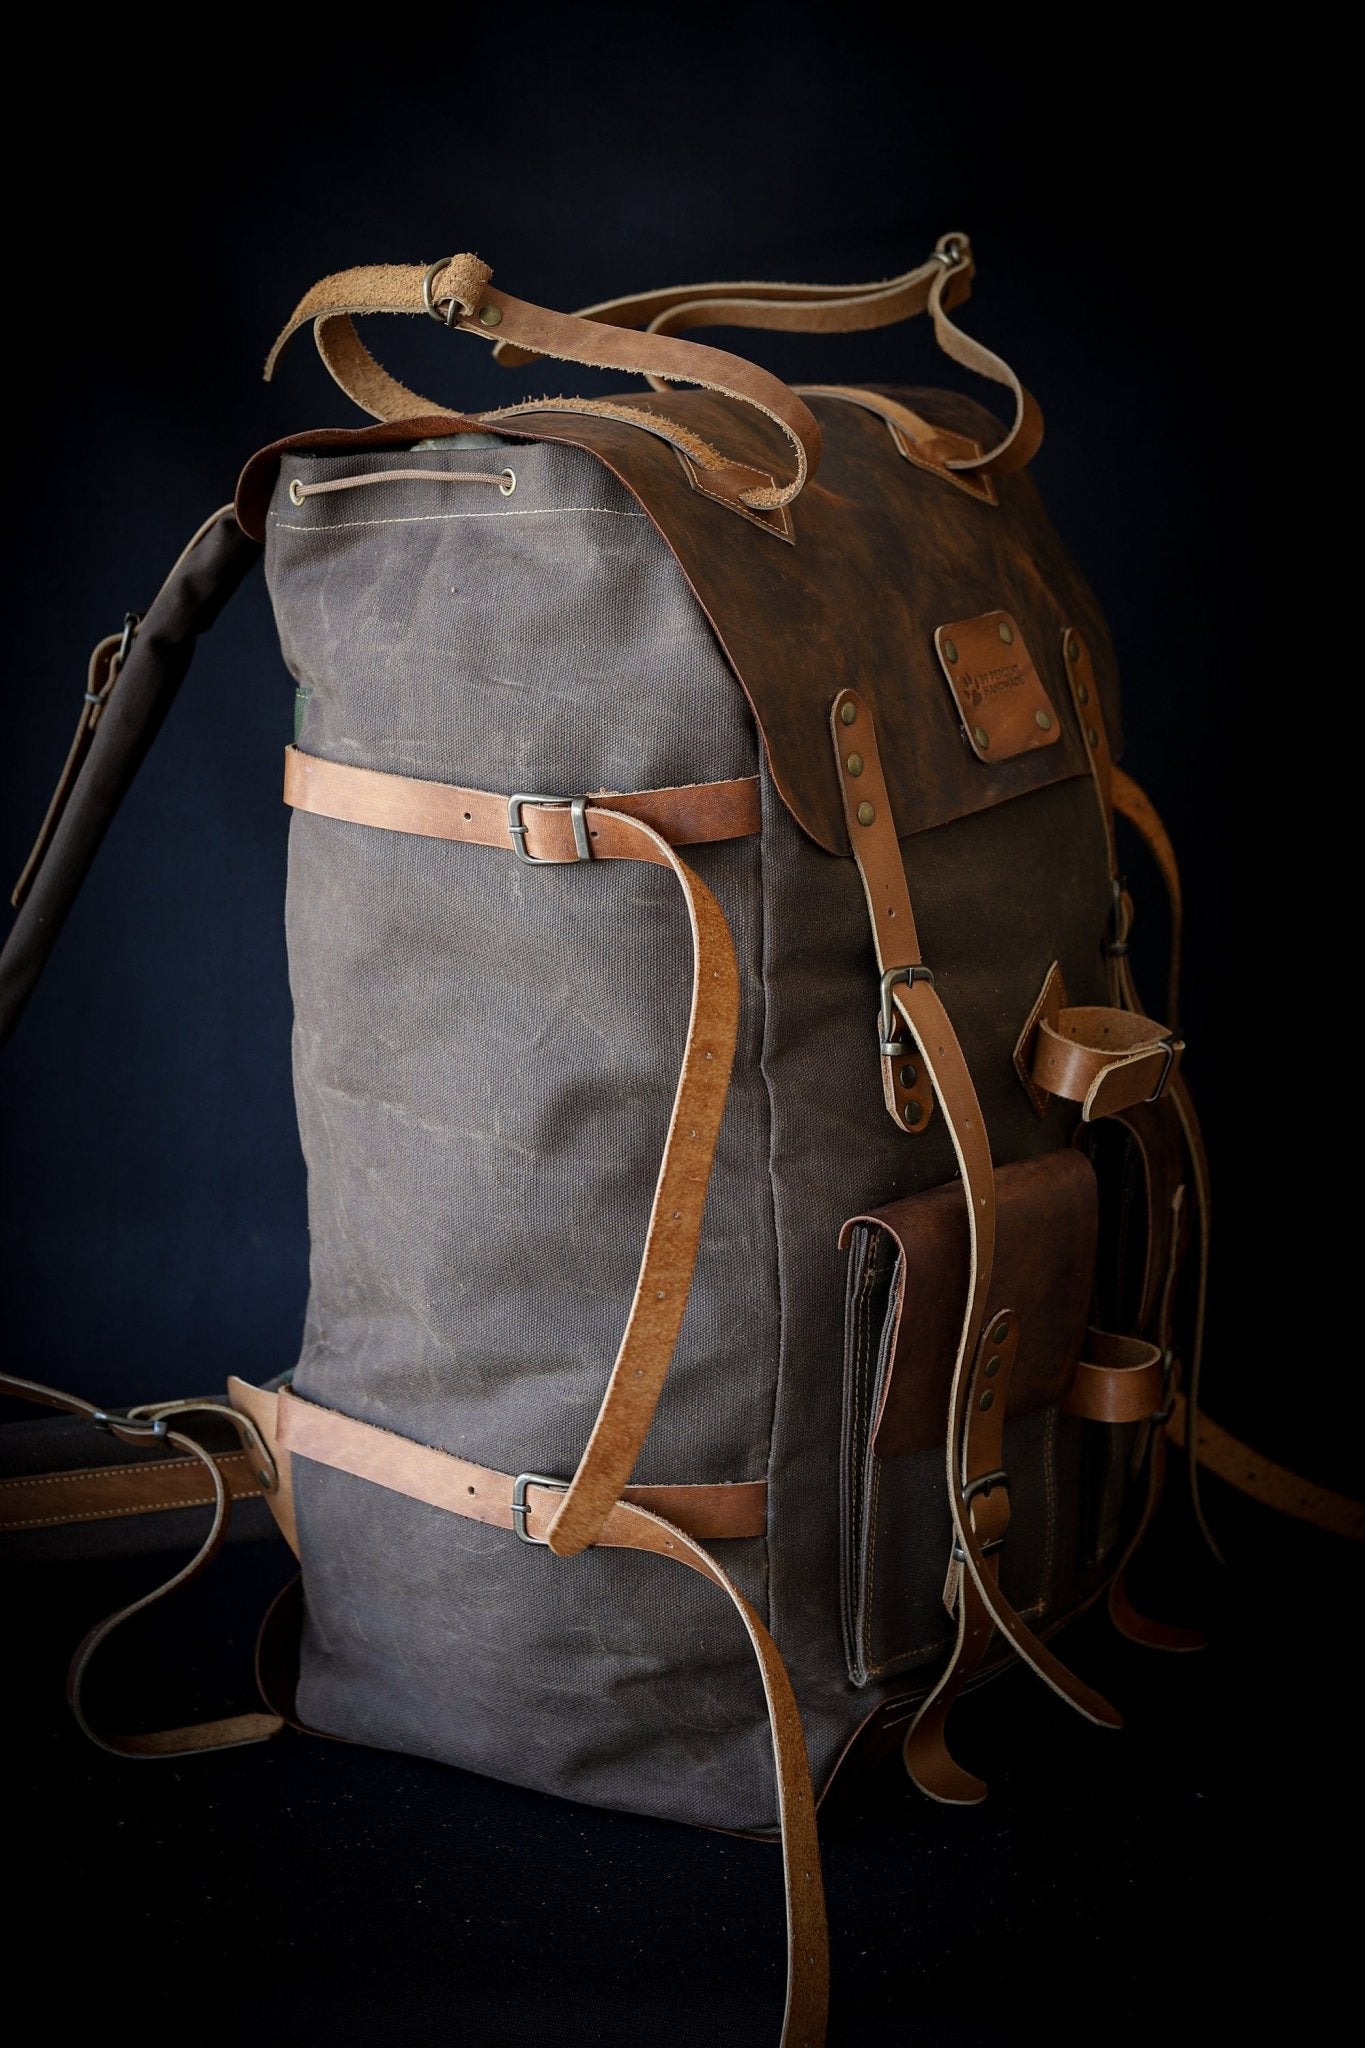 Best Camping Backpack. Best Hiking Backpack. Sturdy and Cool